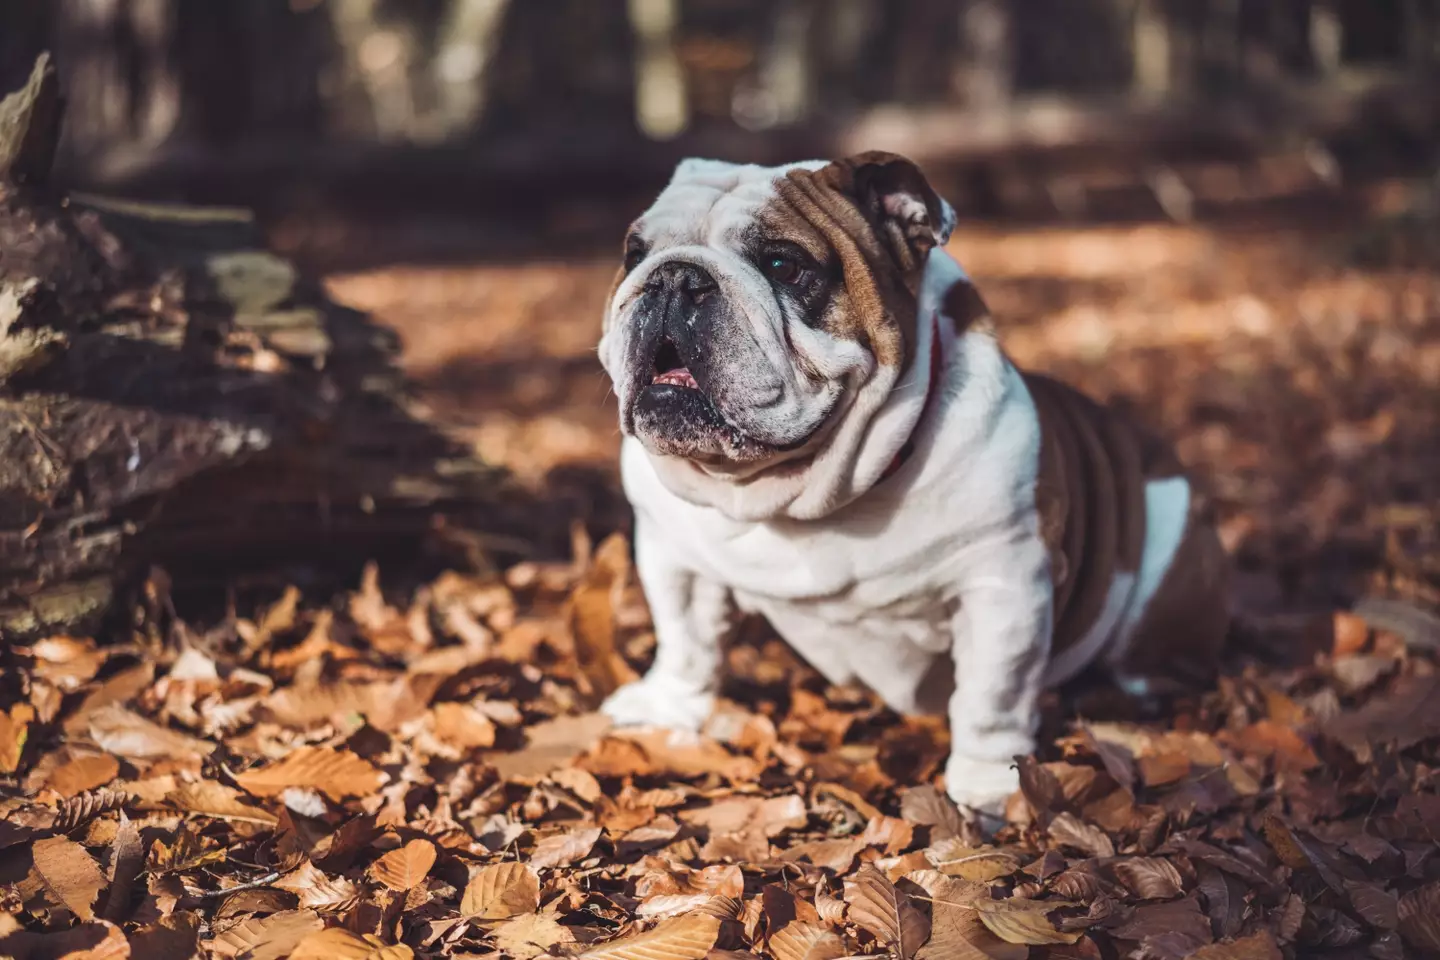 English Bulldogs often produce large litters and require c-sections. (